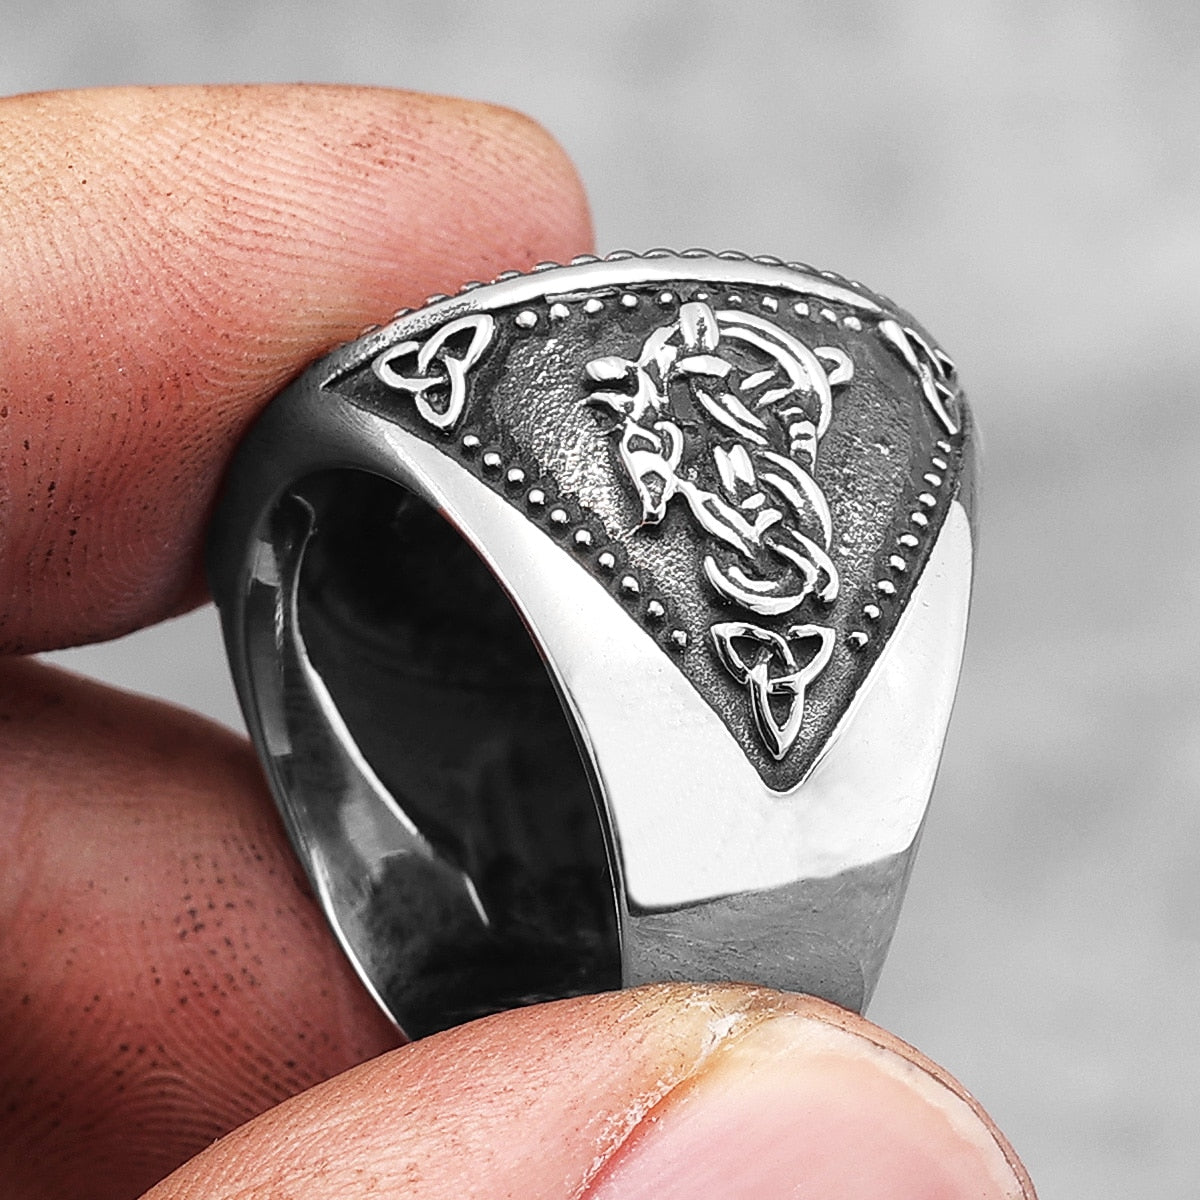 Nordic Viking Wolf Stainless Steel Mens Rings Unique Punk Amulet for Male Boyfriend Biker Jewelry Creativity Gift